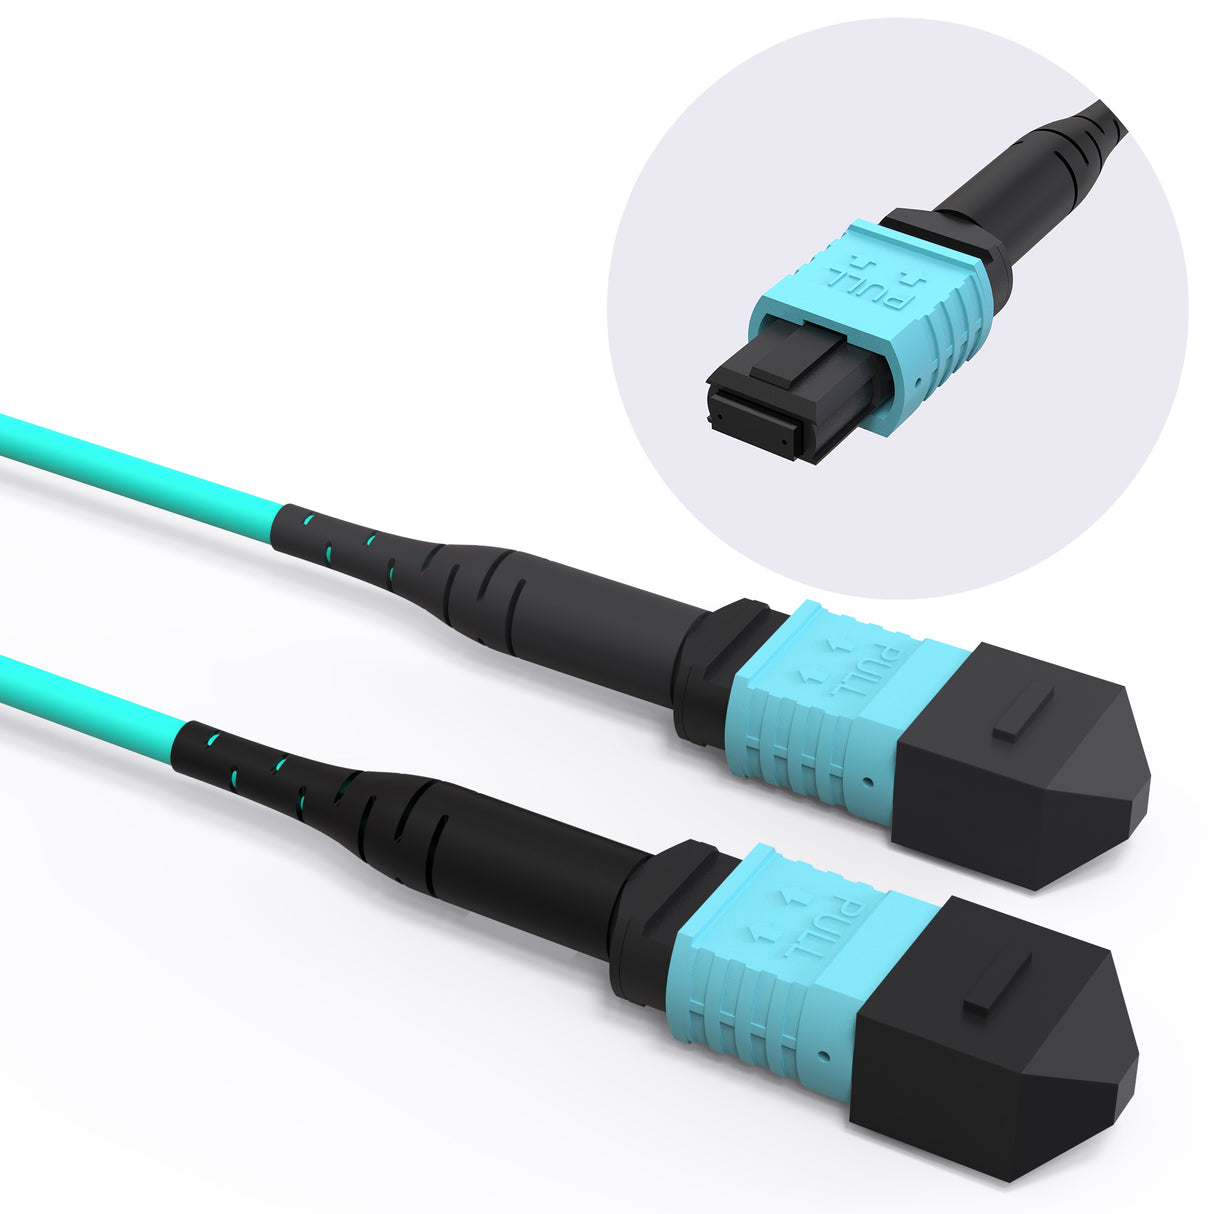 VANDESAIL MPO to MPO Fiber Cable Aqua, 12 Strand OM3 Multimode Fiber, Compatible with MTP/QSFP+ for High-Density Networking